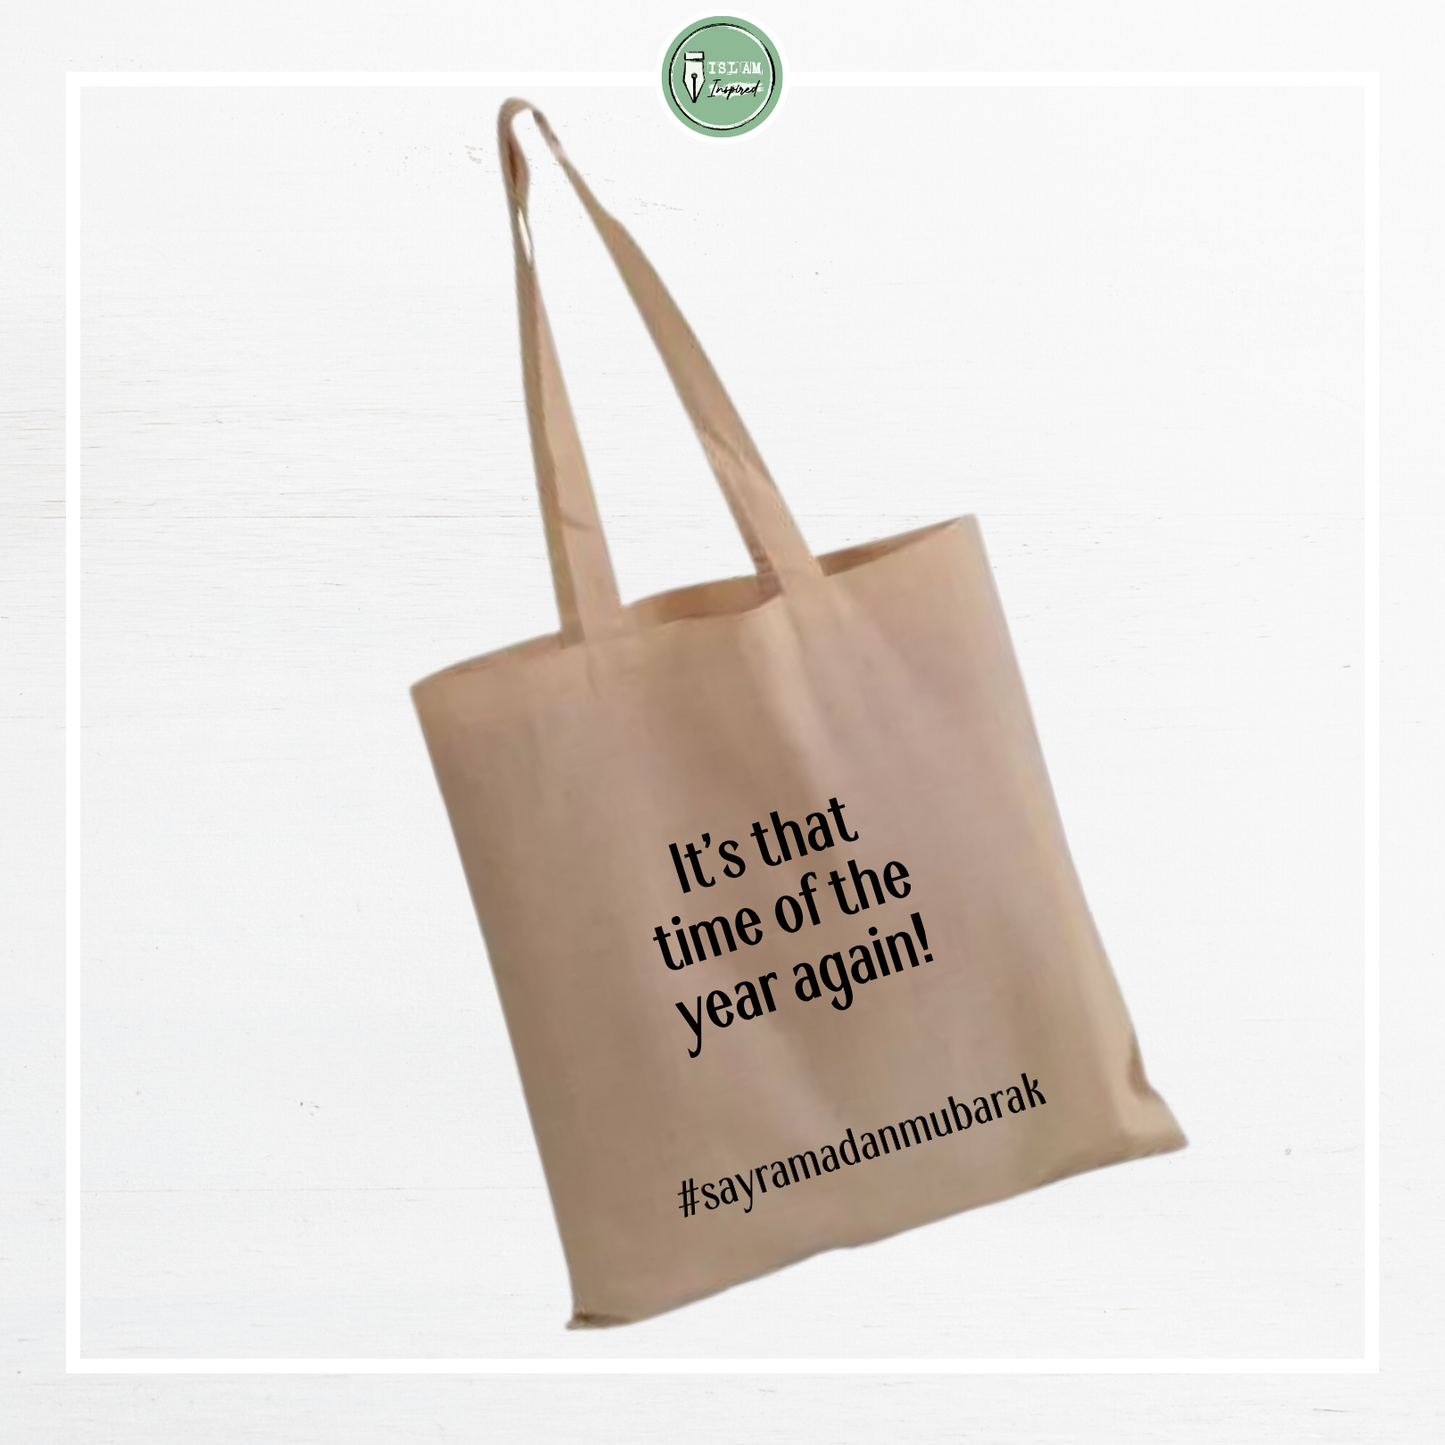 Totebag 'It's that time of the year again!'